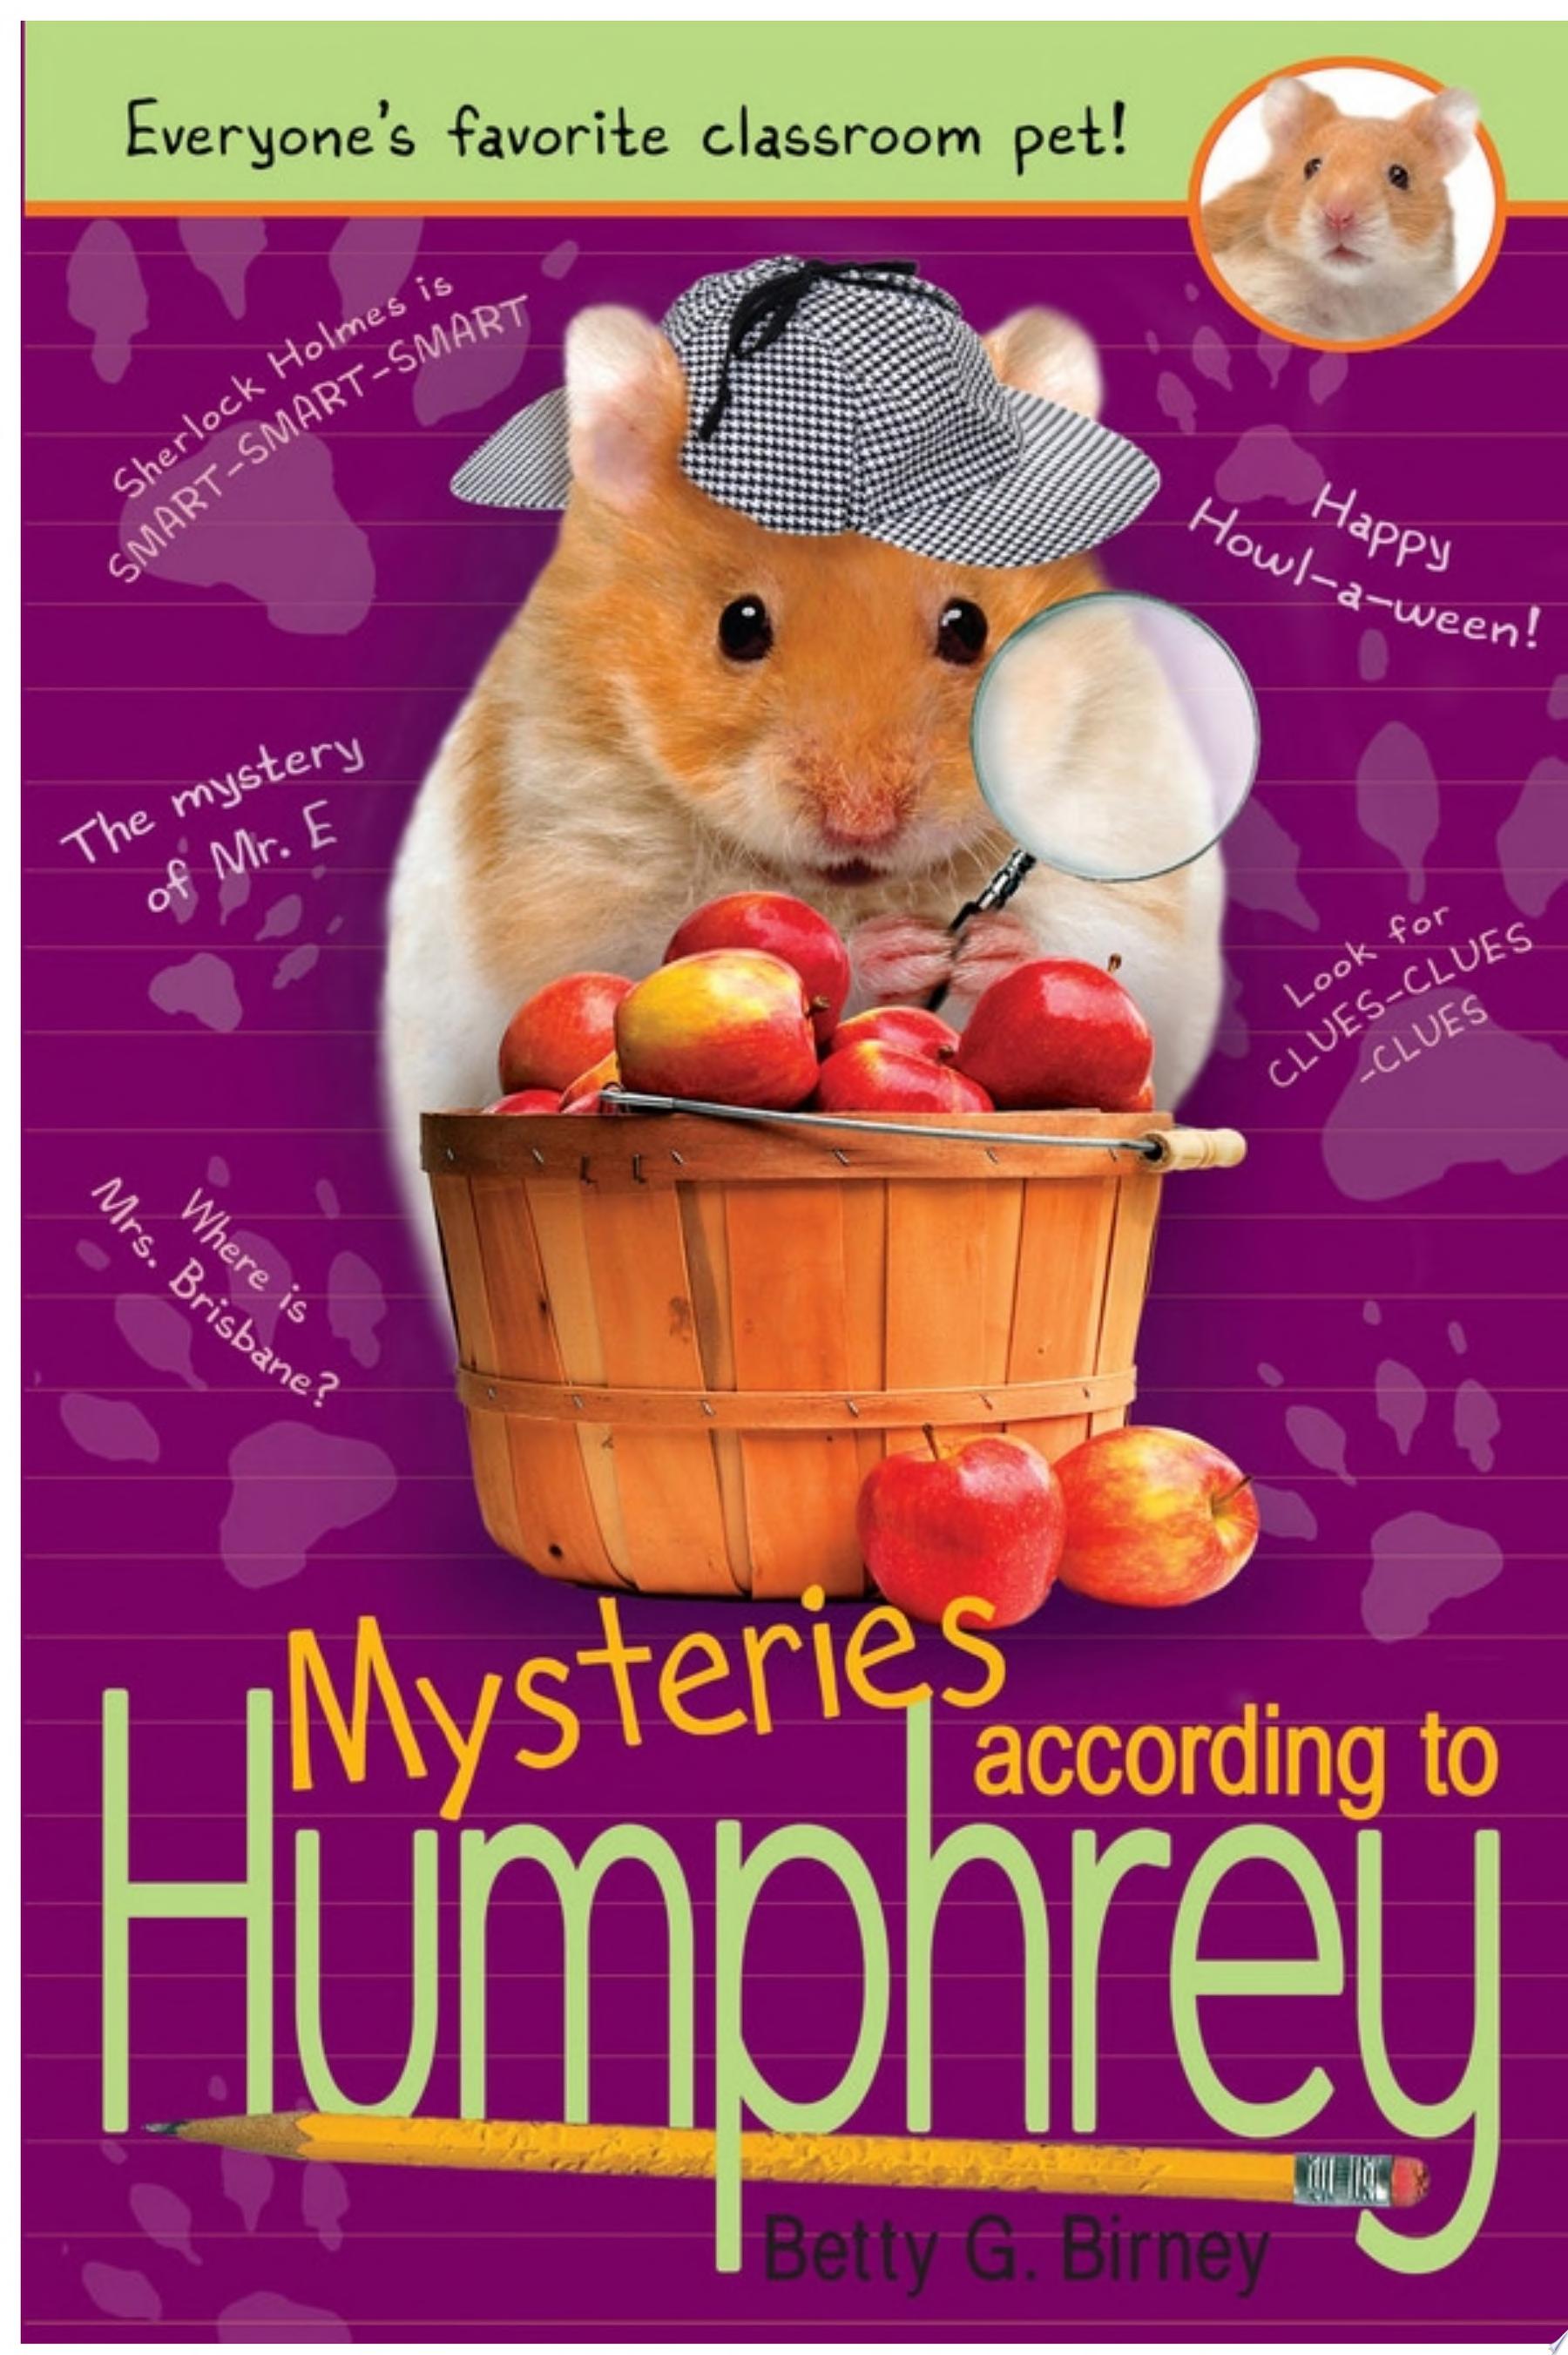 Image for "Mysteries According to Humphrey"